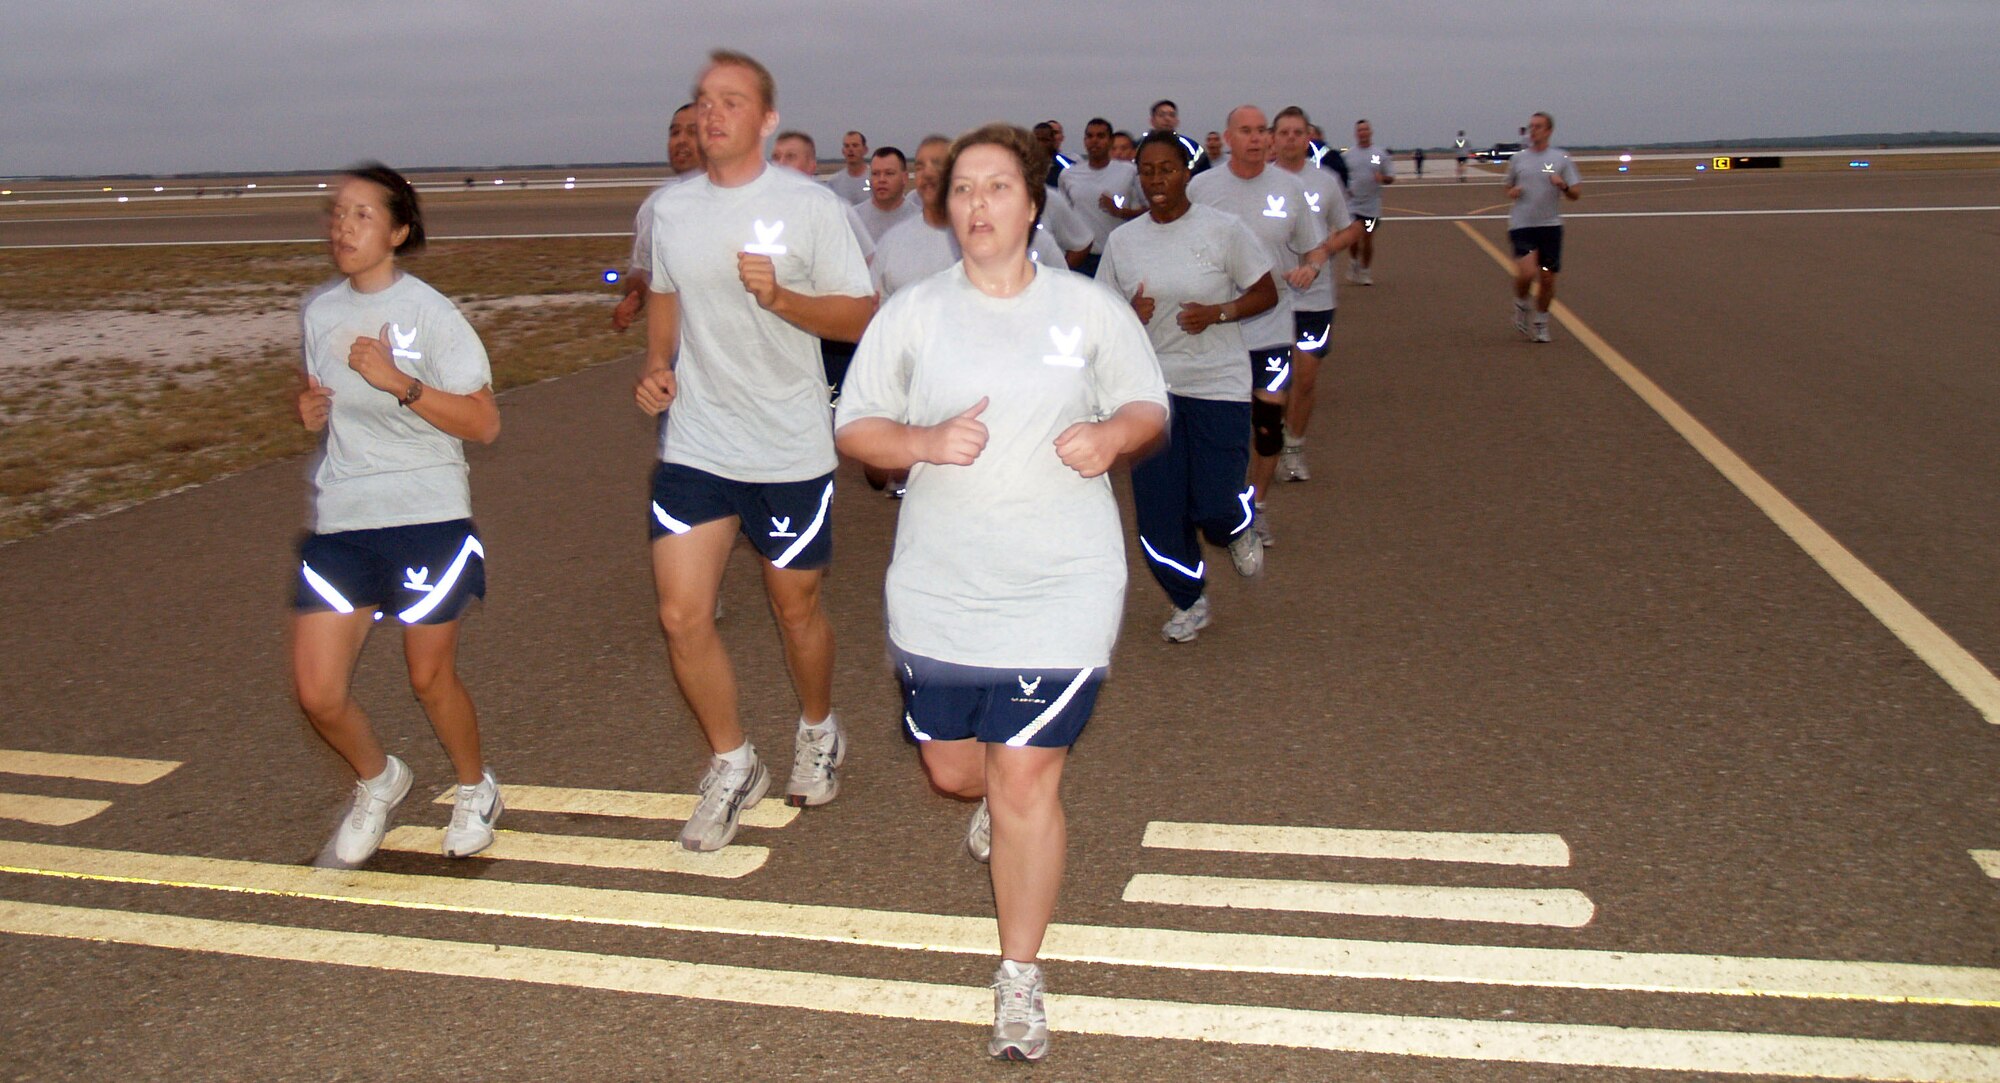 LAUGHLIN AIR FORCE BASE, Texas -- Runners cross the finish line at the completion of the 1.5 mile run around the flight line during Fitness Esprit de Corps Oct. 22. Fitness Esprit de Corps was the being of activities for Wingman Day this year. (U.S. Air Force photo by Ron Scharven)